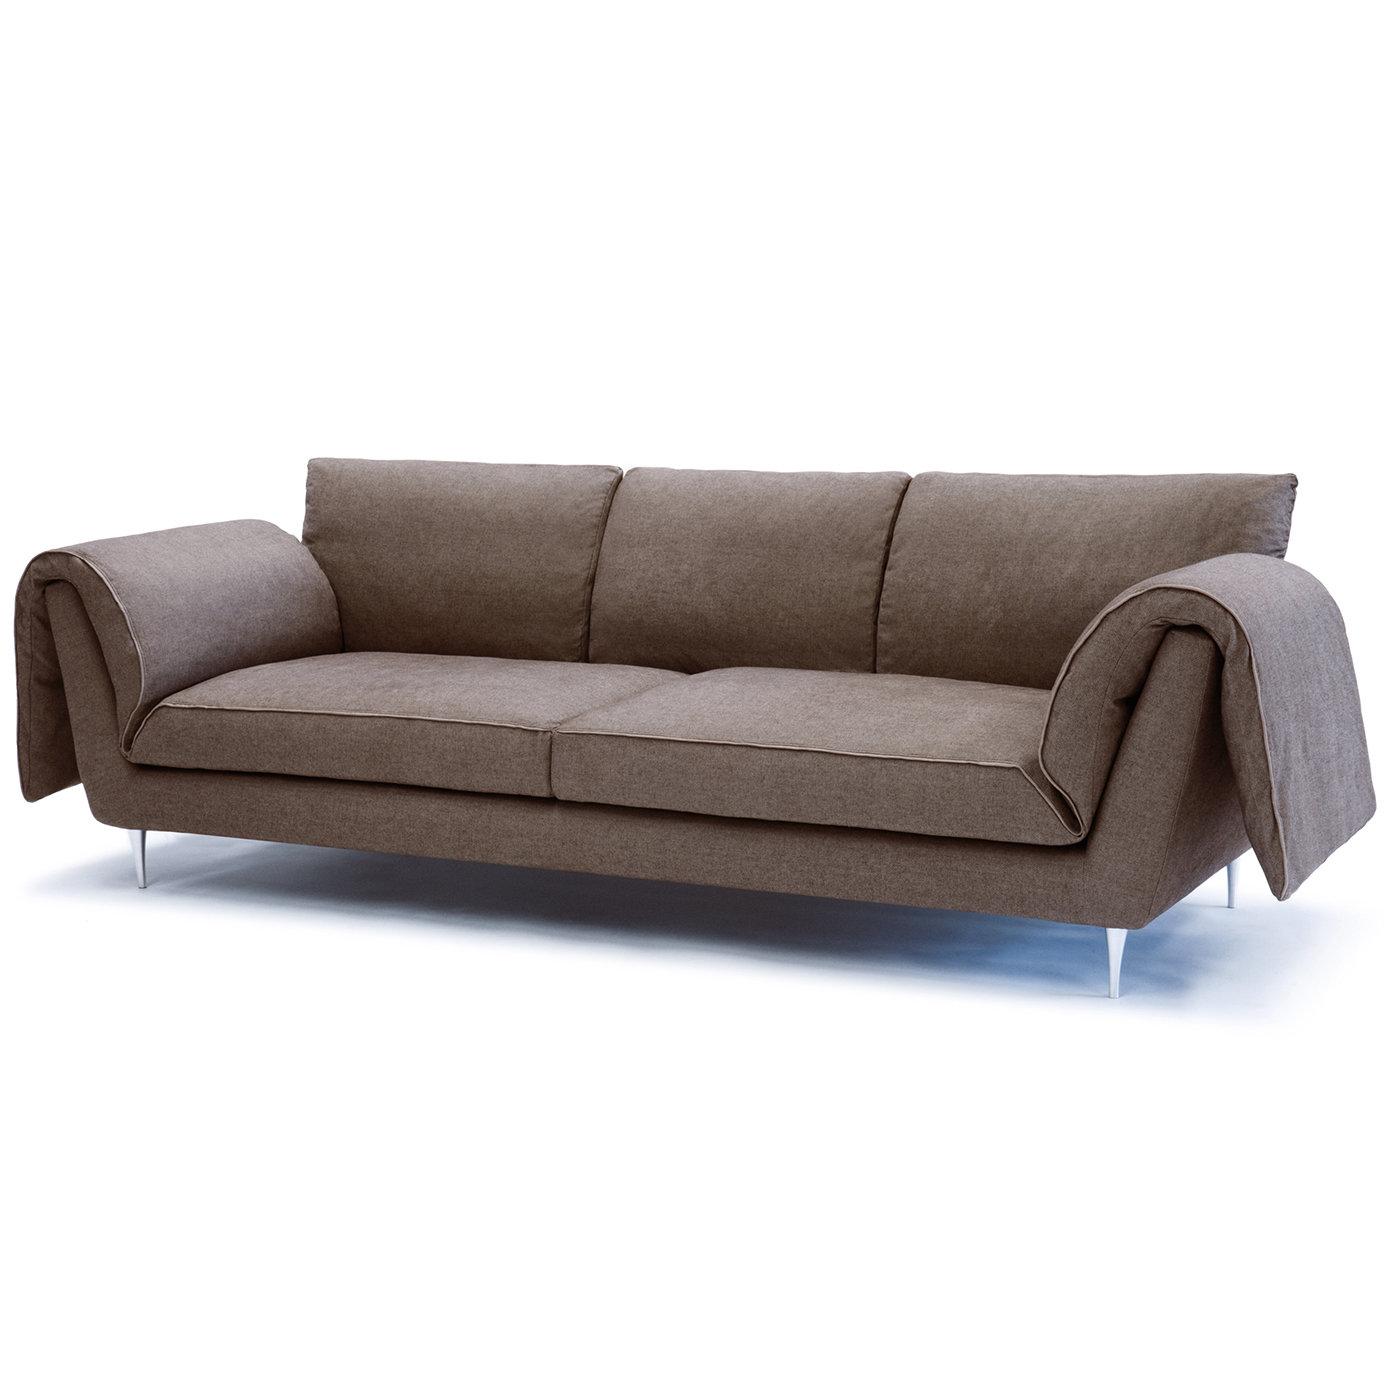 Evoking the clean and minimal lines of midcentury design, this sofa will make a statement in a modern living room. This convertible piece exudes comfort and style in a silhouette characterized by a striking arm design and a well-balanced frame